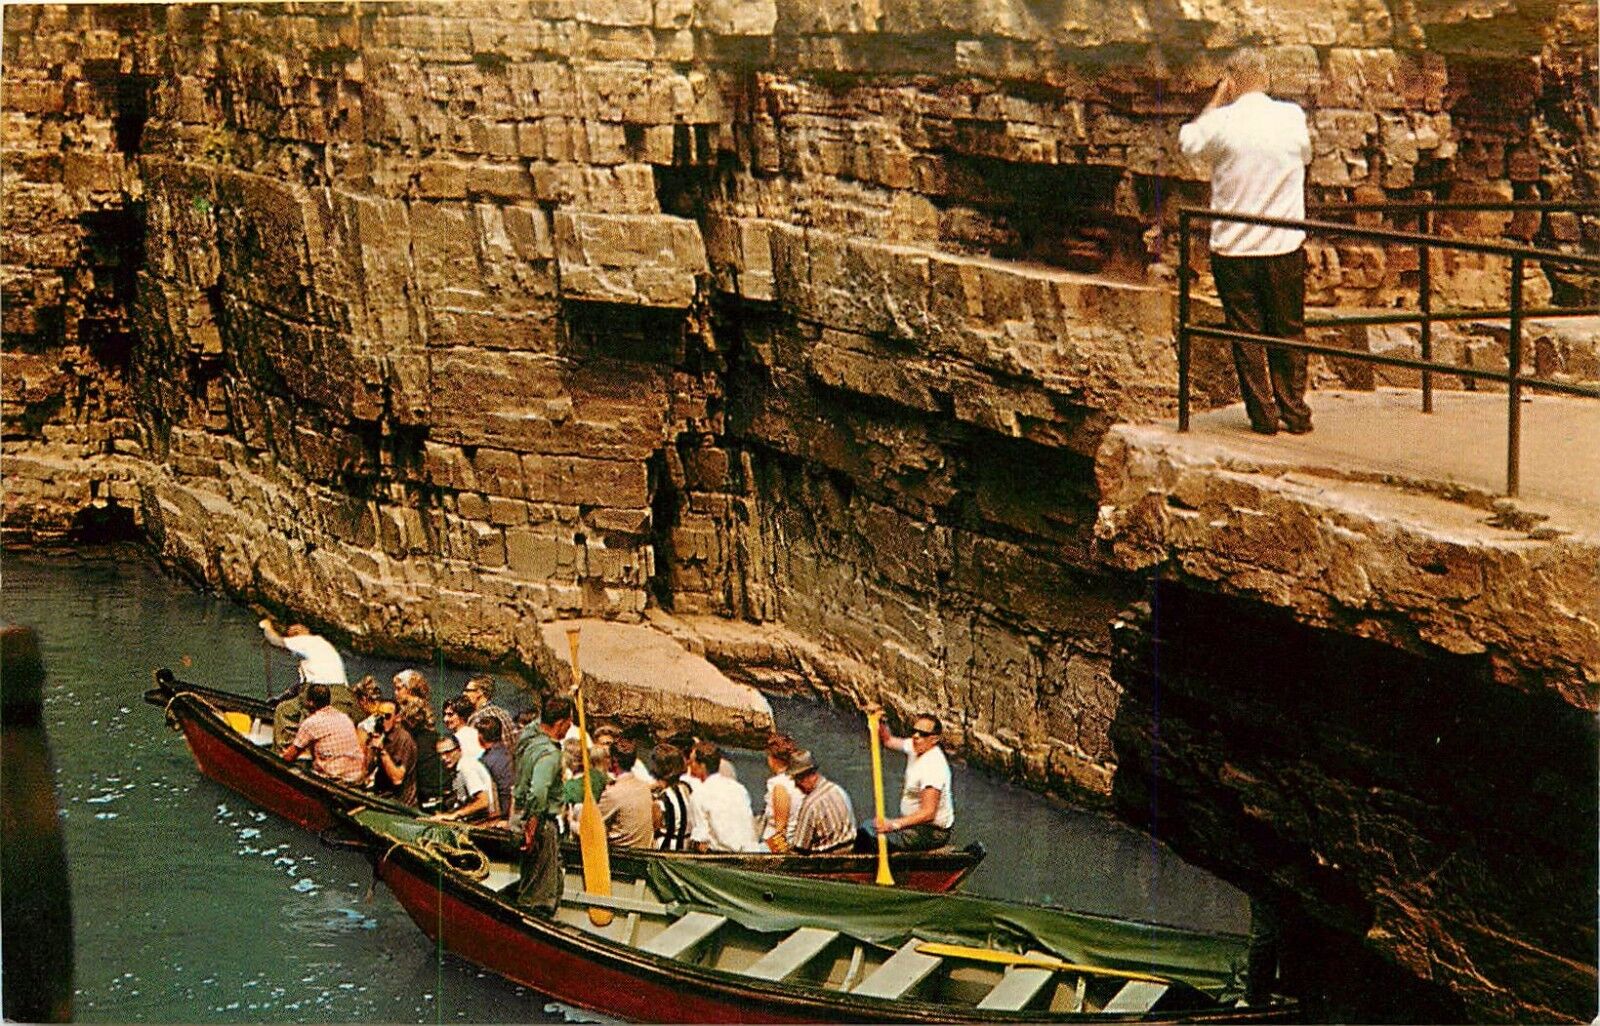 BOAT RIDE AUSABLE CHASM TABLE ROCK NEW YORK NY POSTCARD